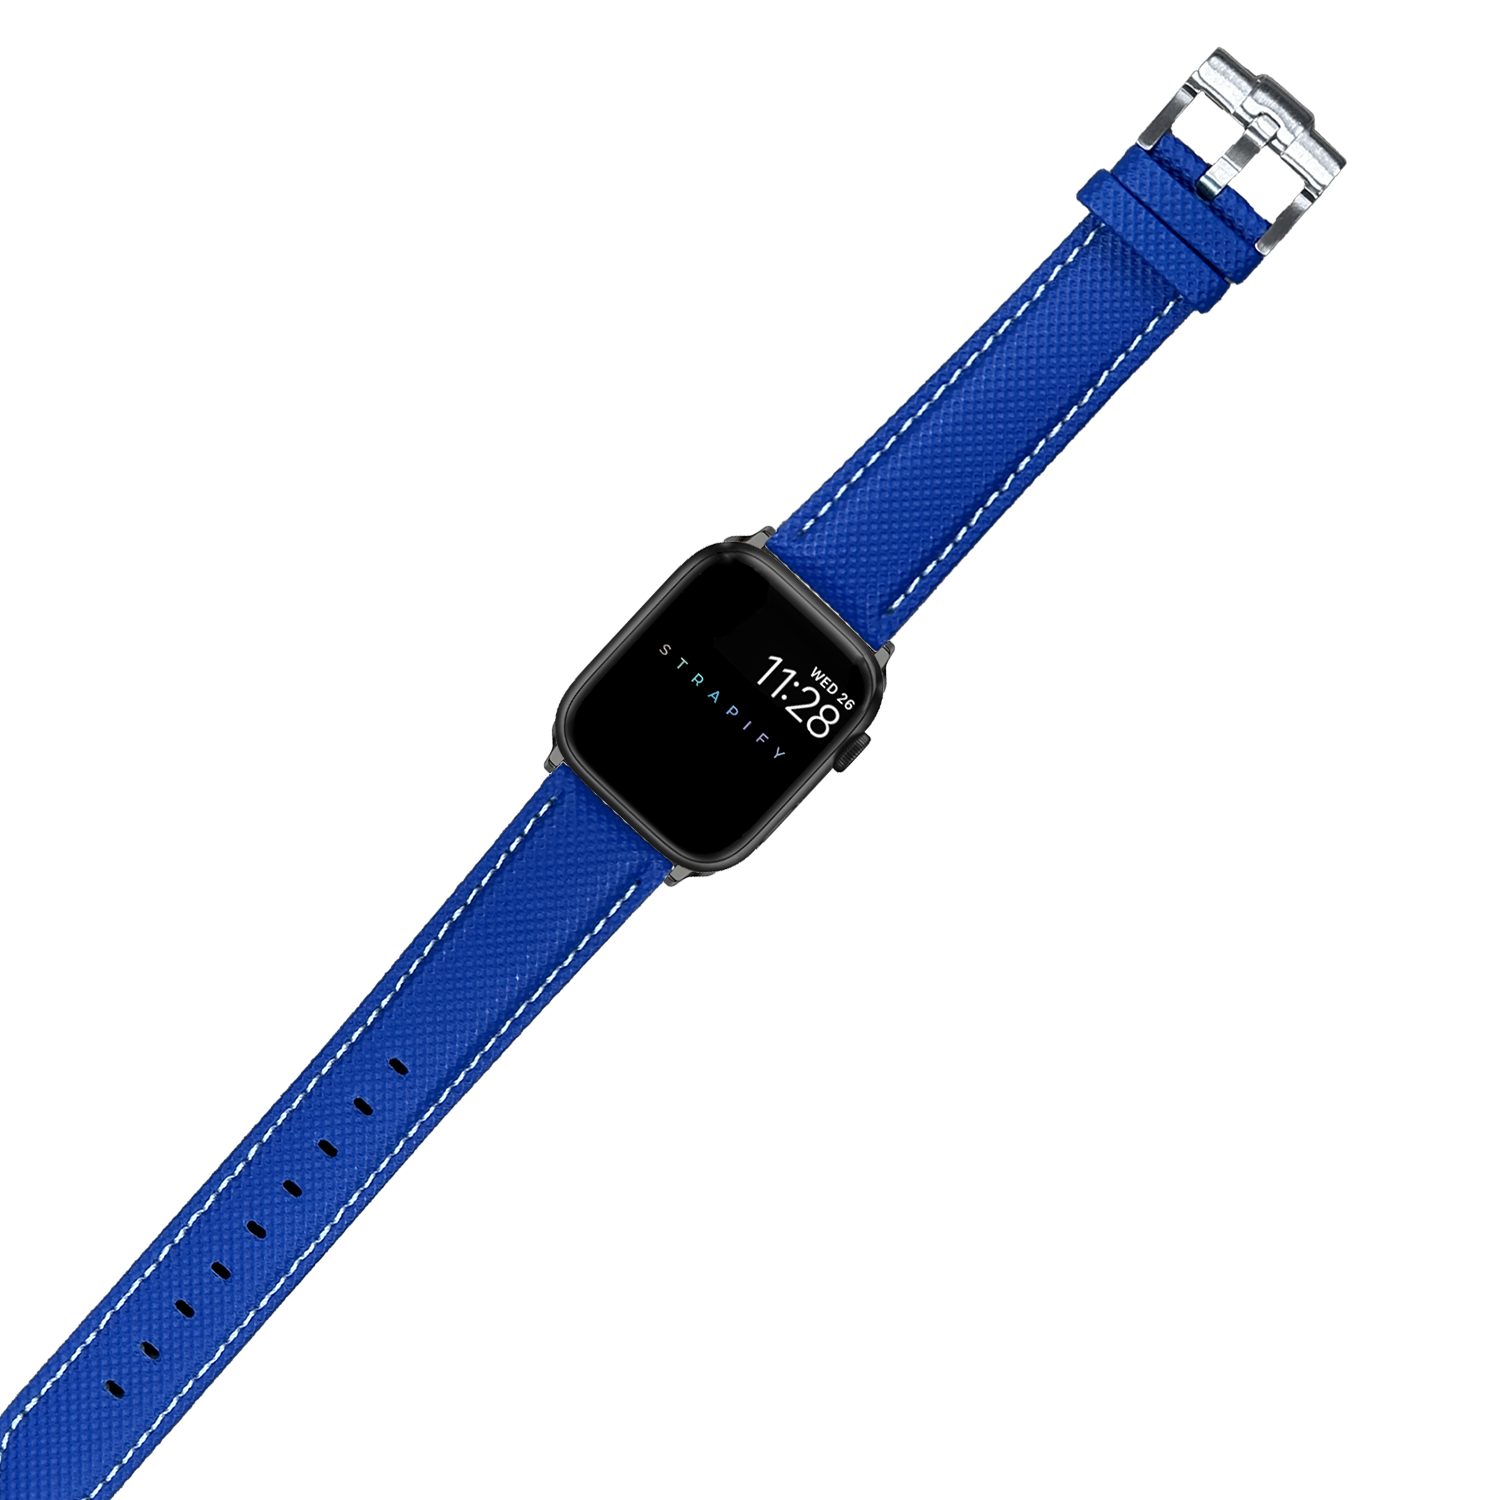 [Apple Watch] Sailcloth - Electric Blue | White Stitching